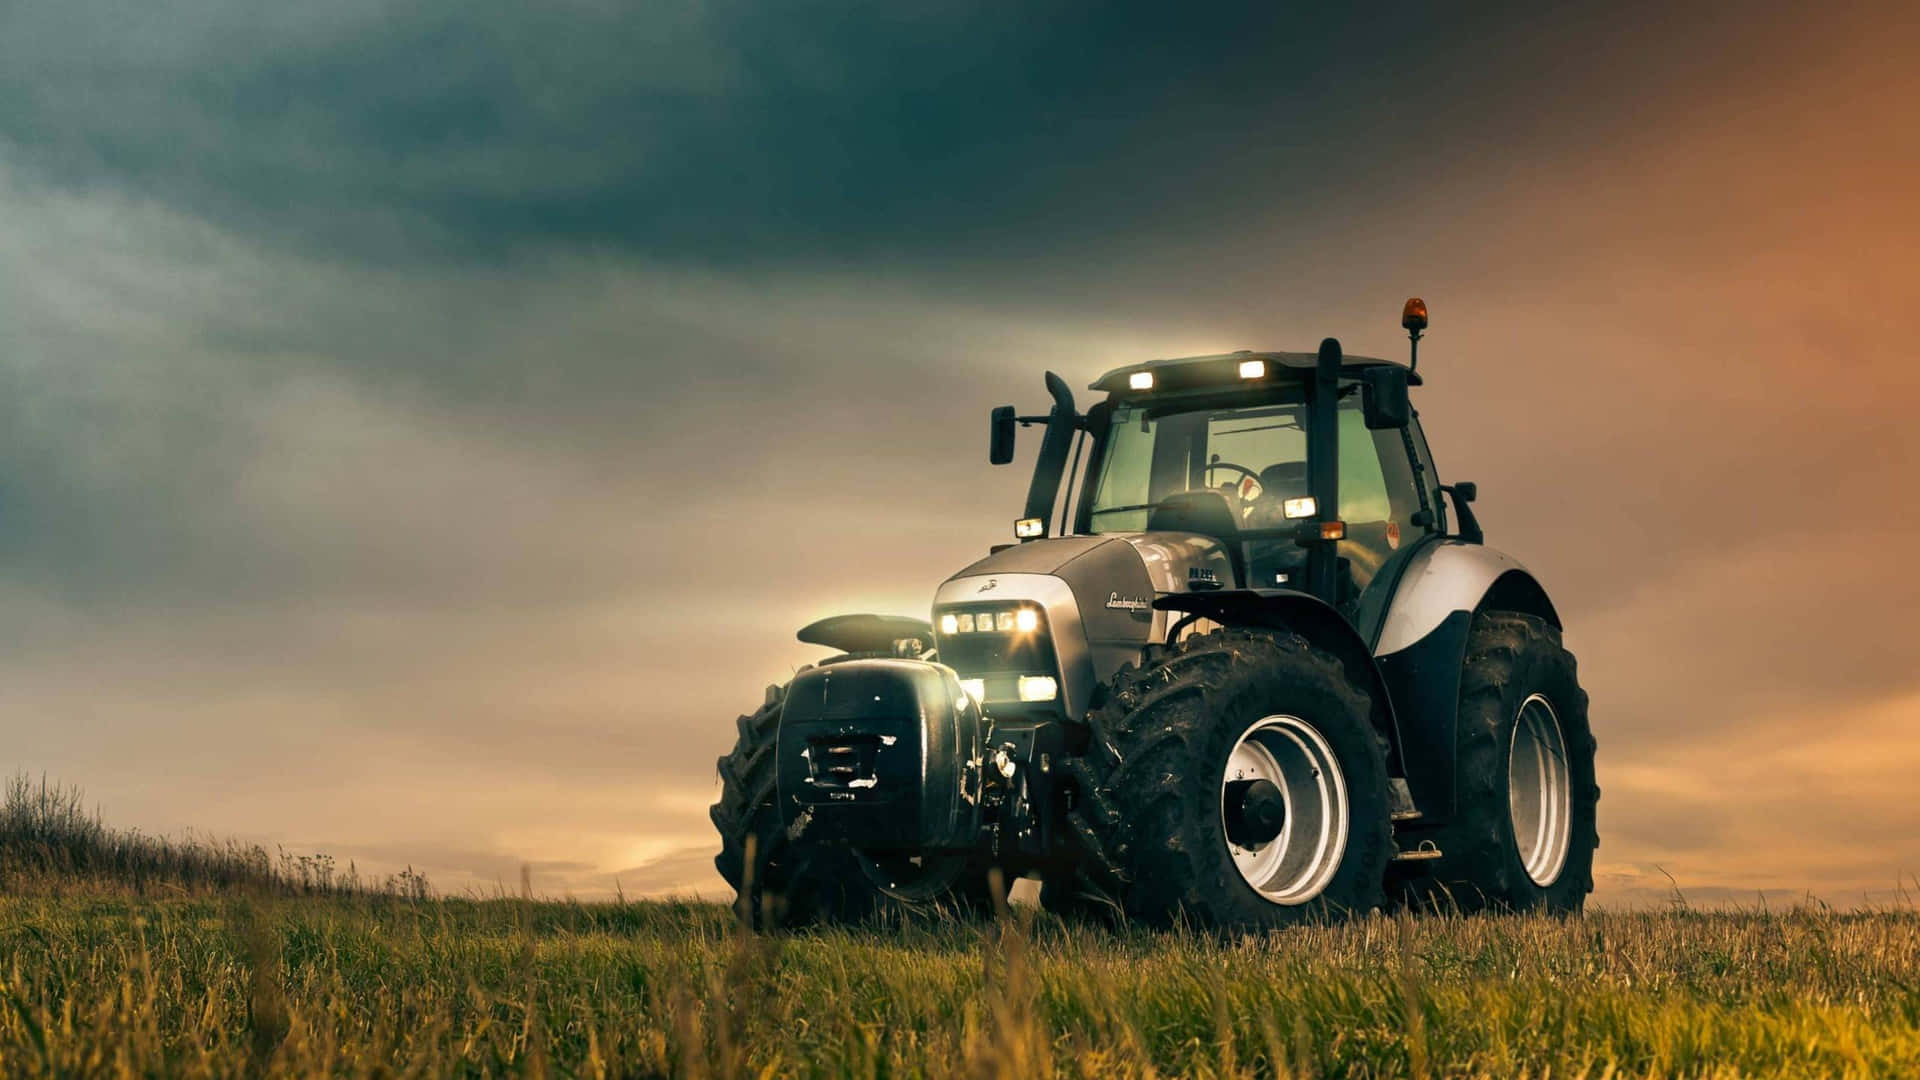 A Tractor Is Parked In A Field With A Cloudy Sky Wallpaper